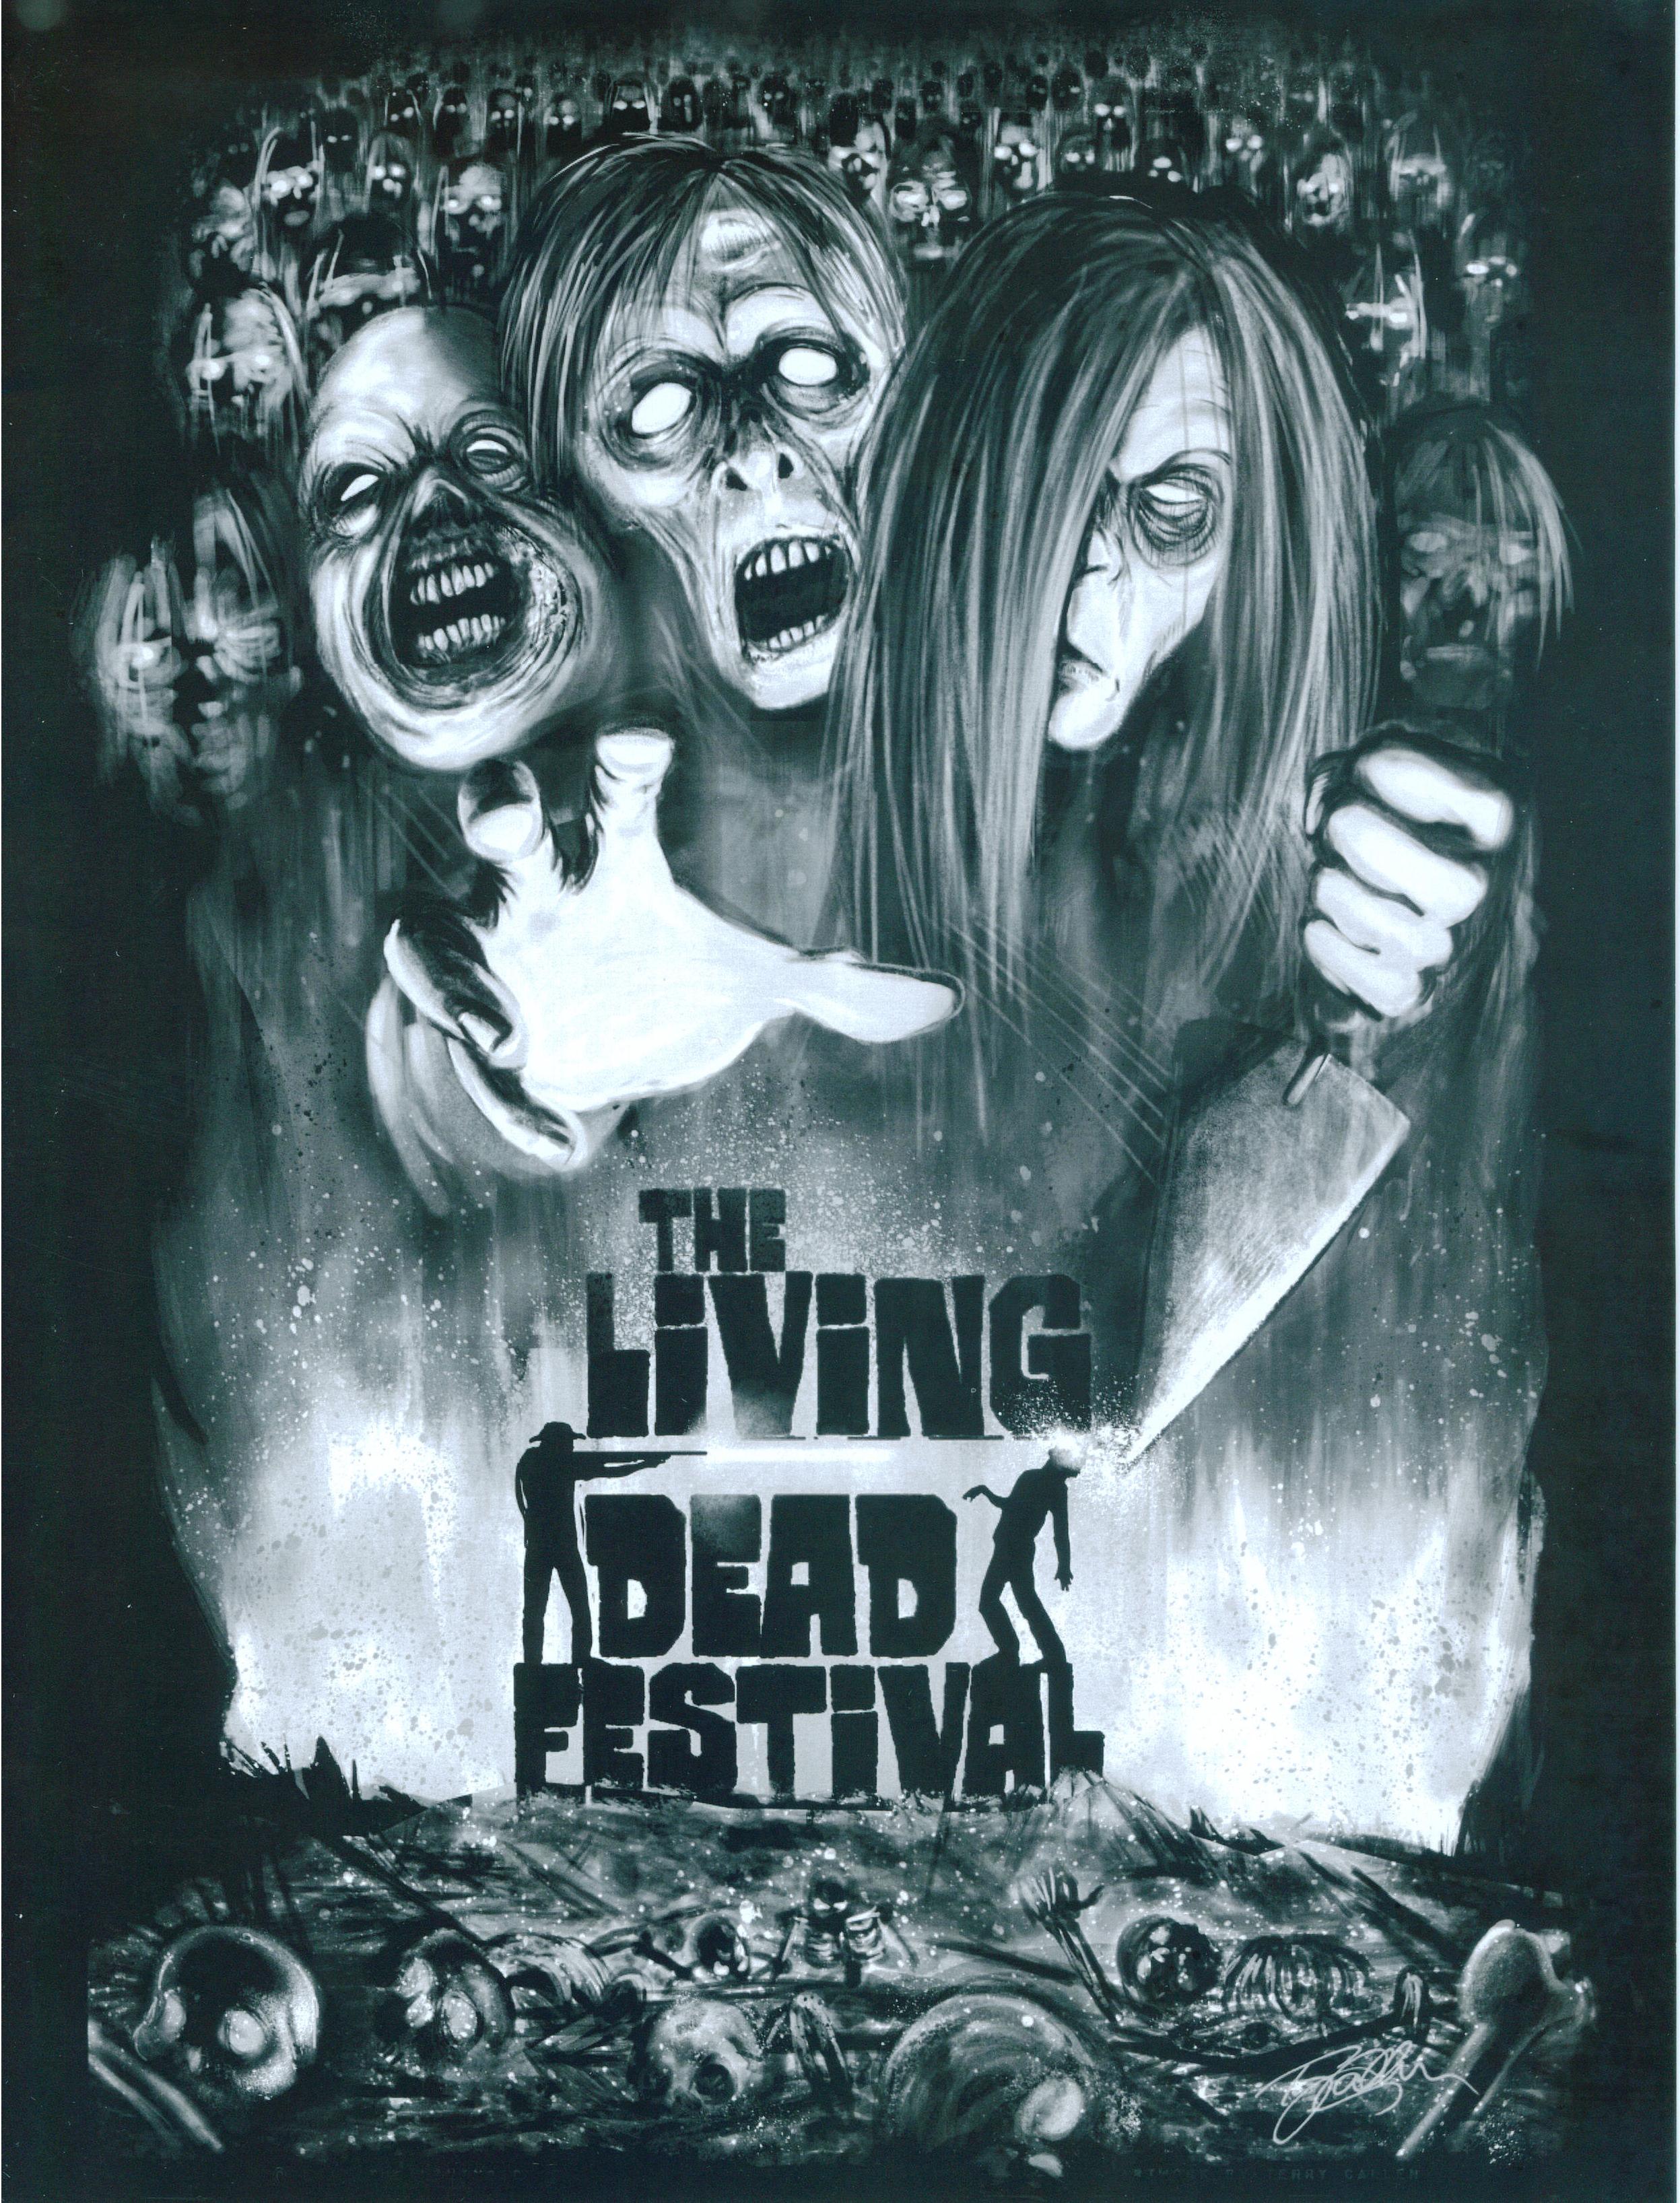 Poster Art for The Living Dead Fest, 2014 created by artist Terry Callen.